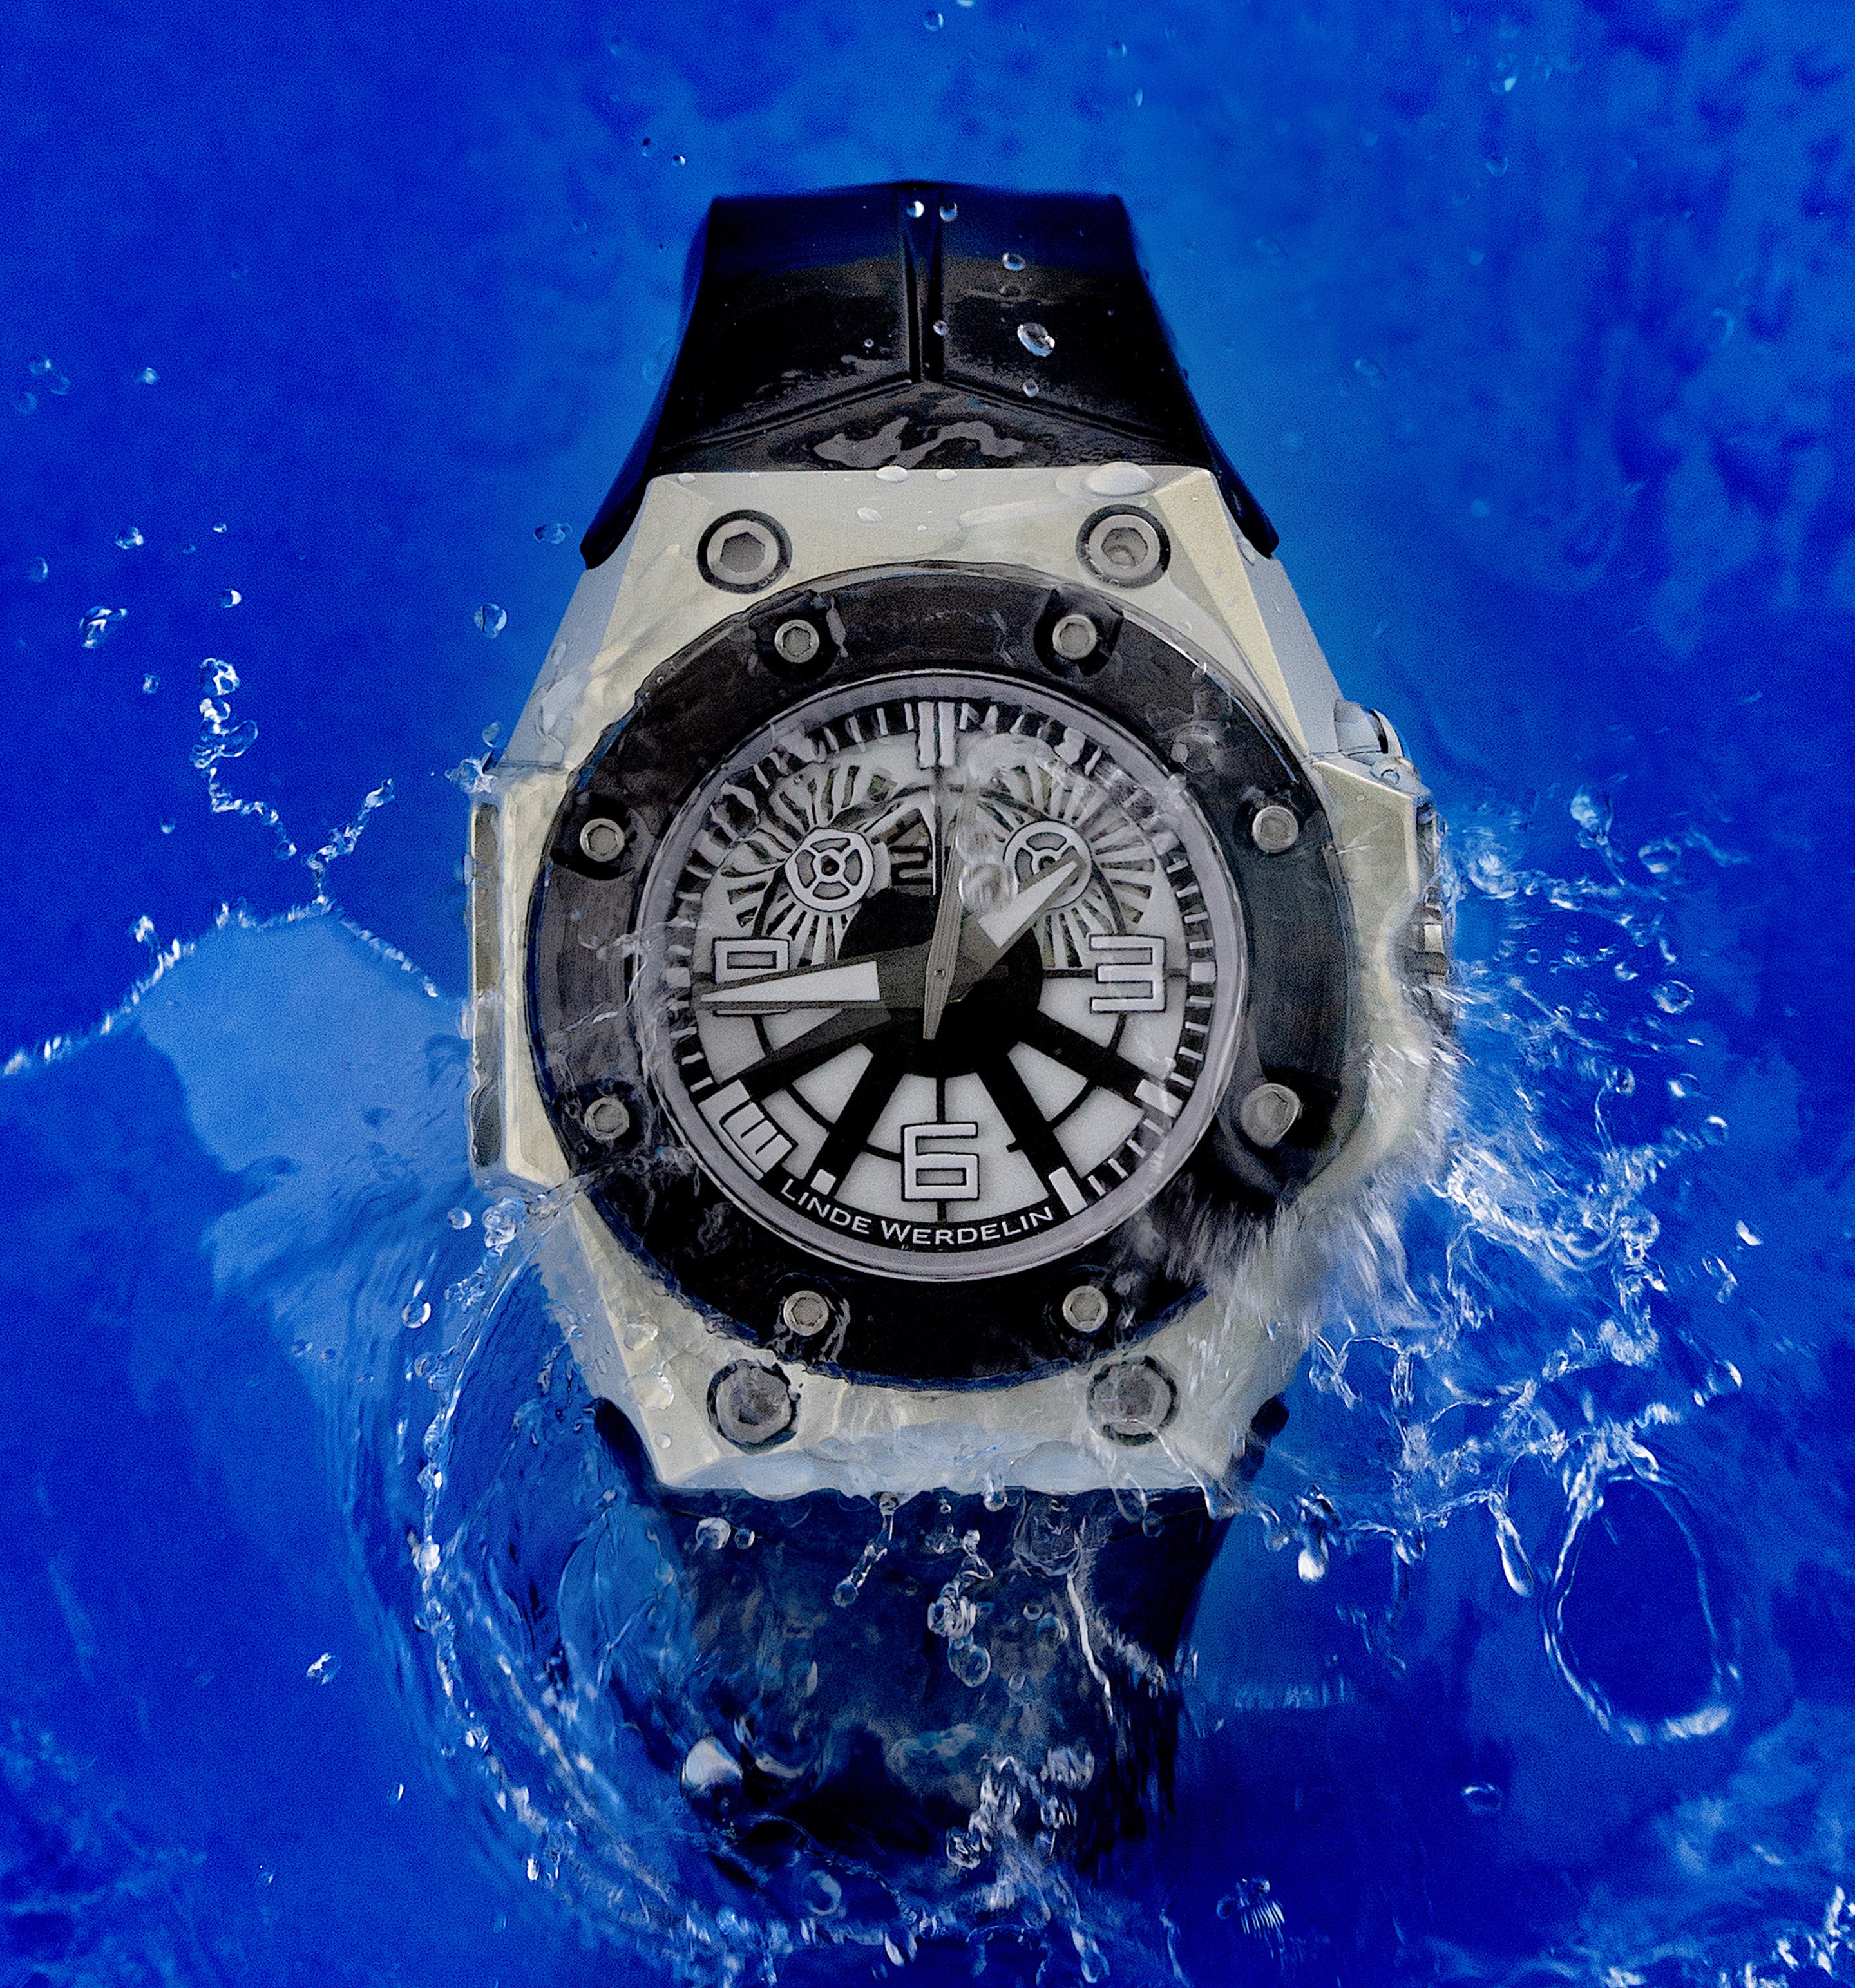 Oktopus Blue Sea is clean and monochromatic, with a subtle dial and clean facets on the milky white Alloy Linde Werdelin (ALW) case